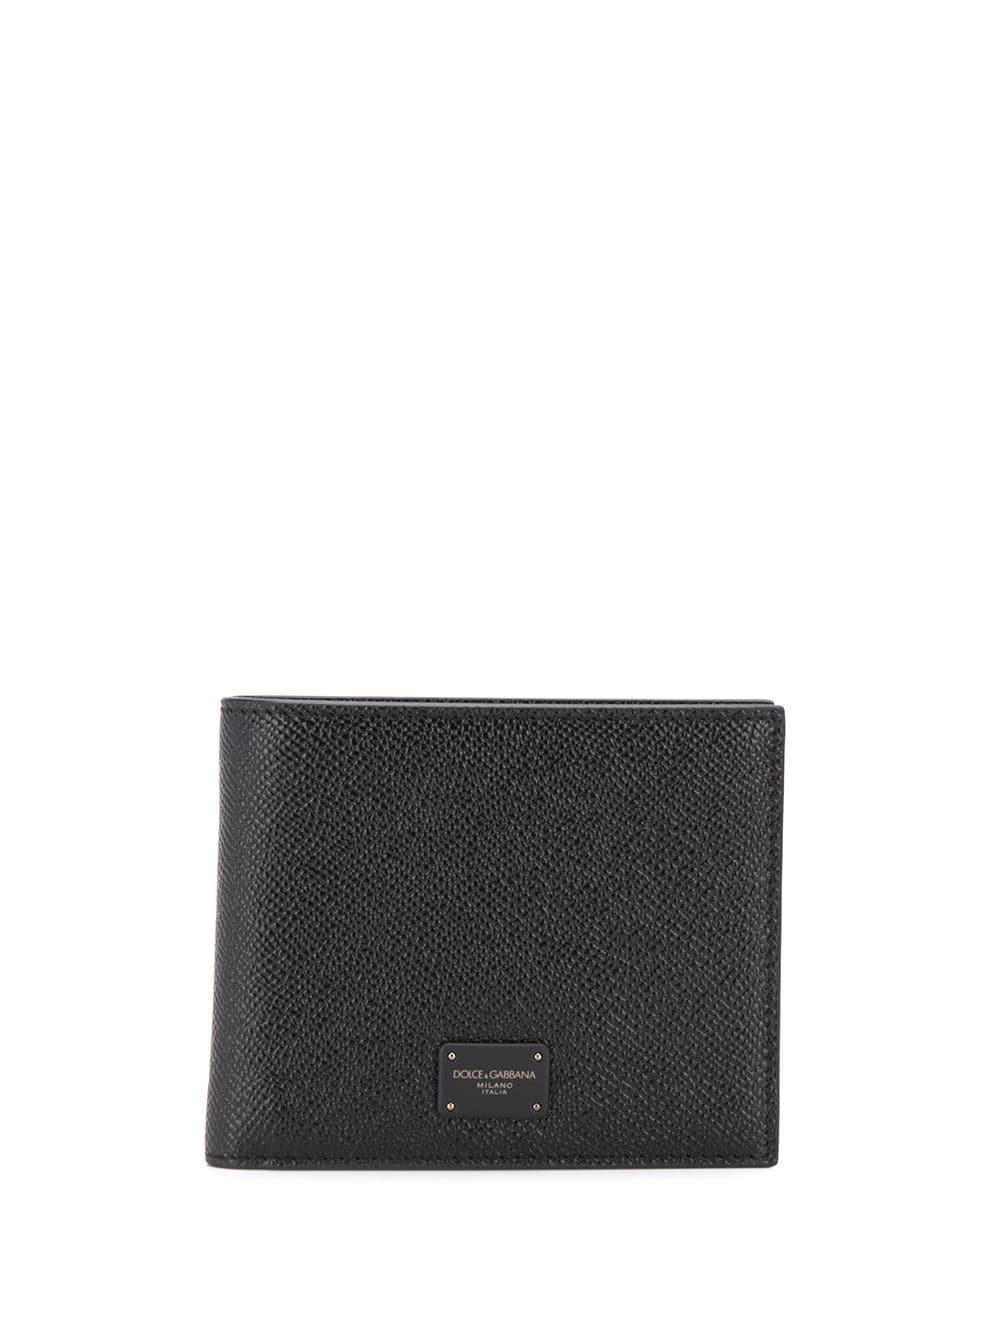 Dolce & Gabbana Leather Textured Wallet in Black for Men - Lyst